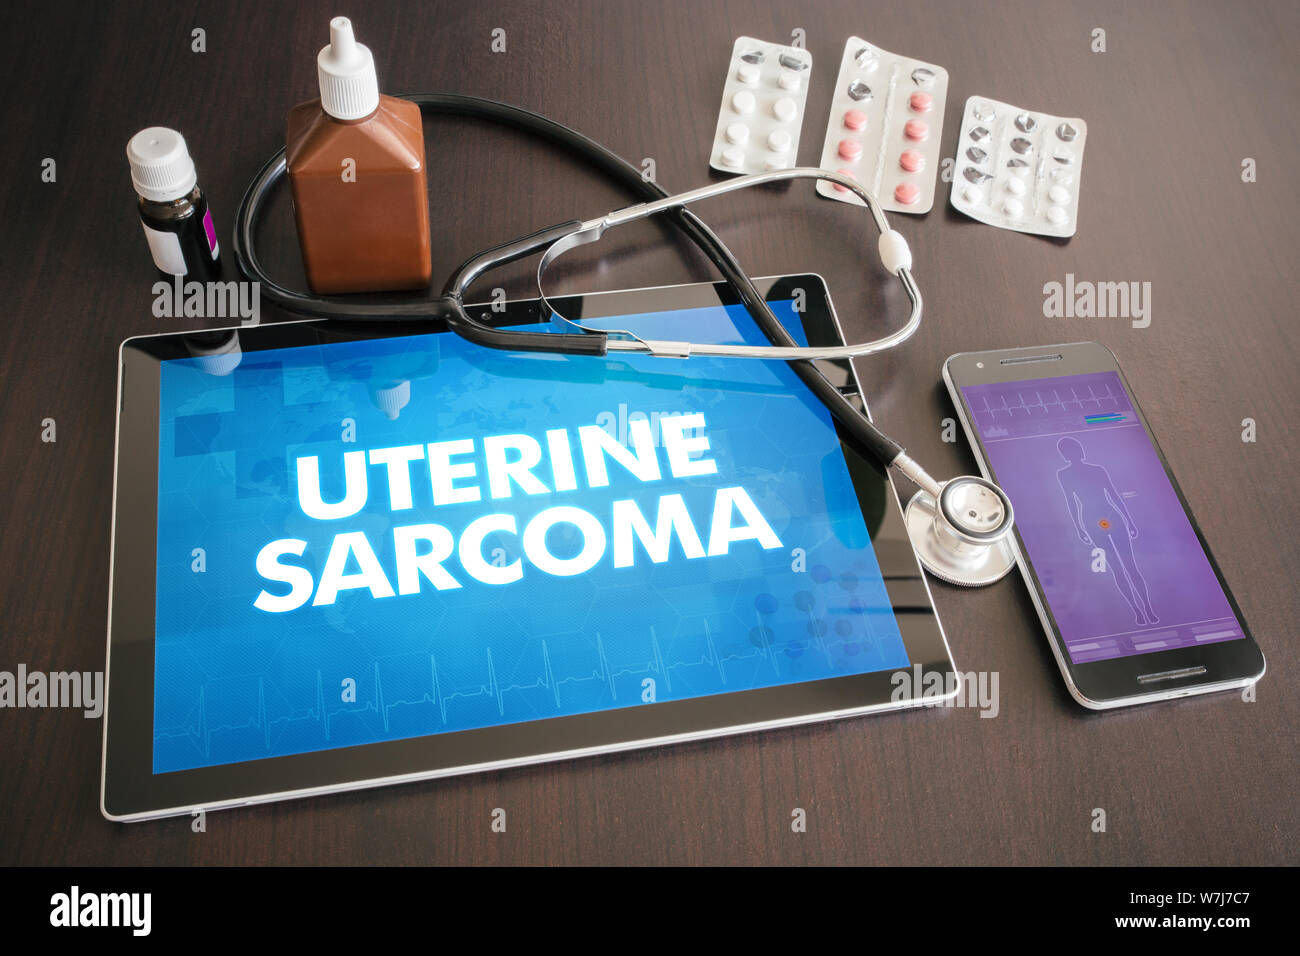 Uterine sarcoma (cancer type) diagnosis medical concept on tablet screen with stethoscope. Stock Photo